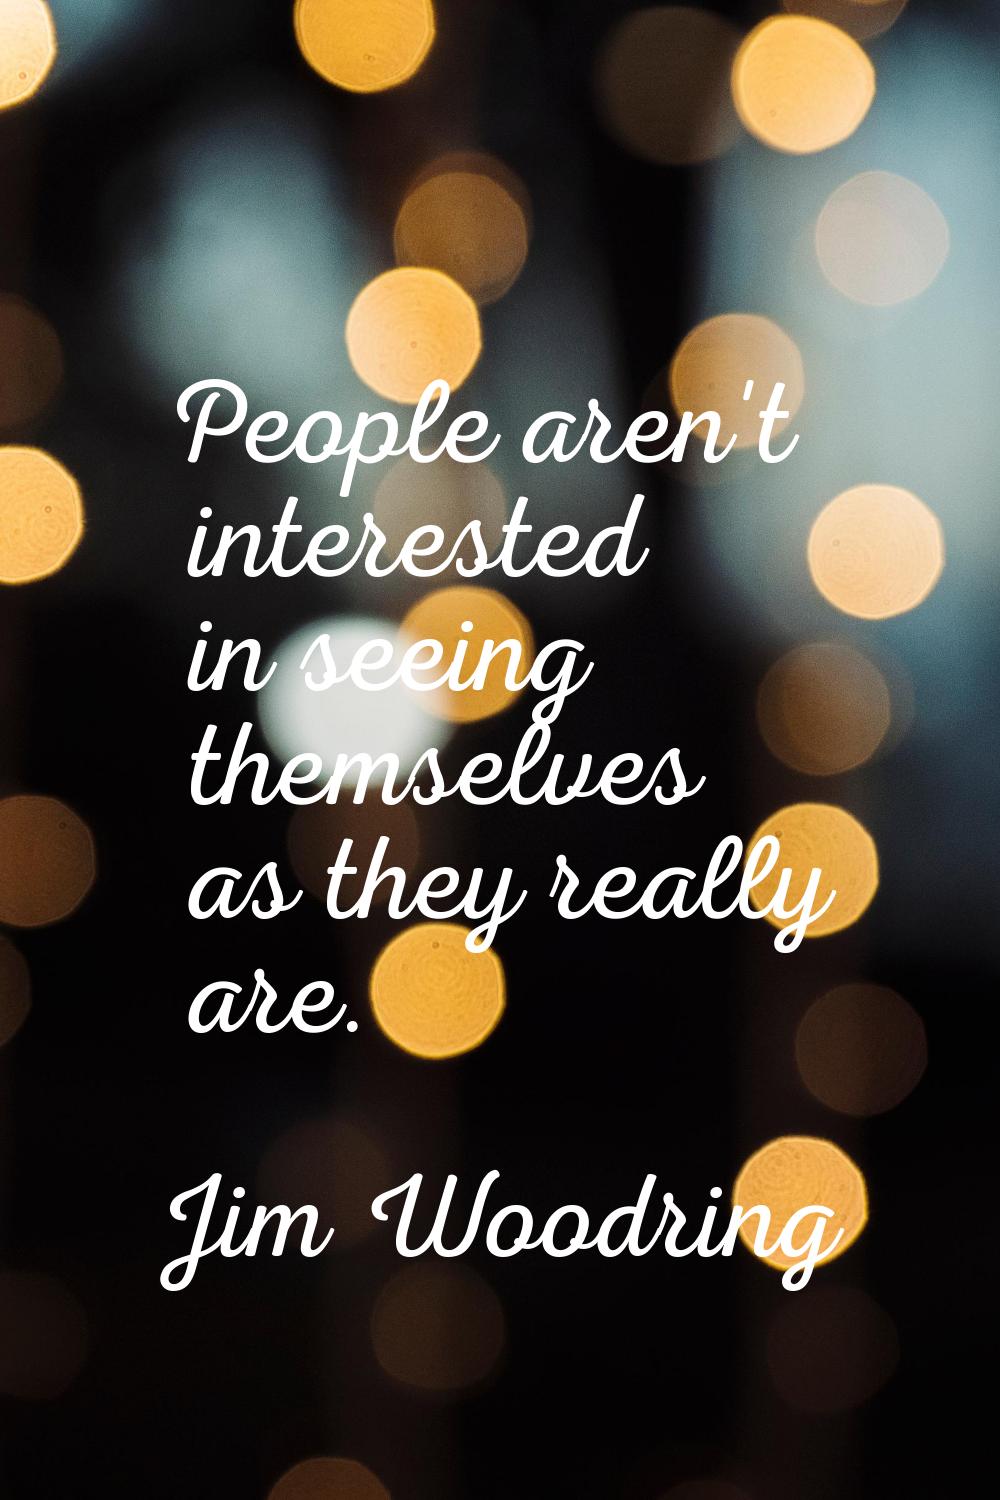 People aren't interested in seeing themselves as they really are.